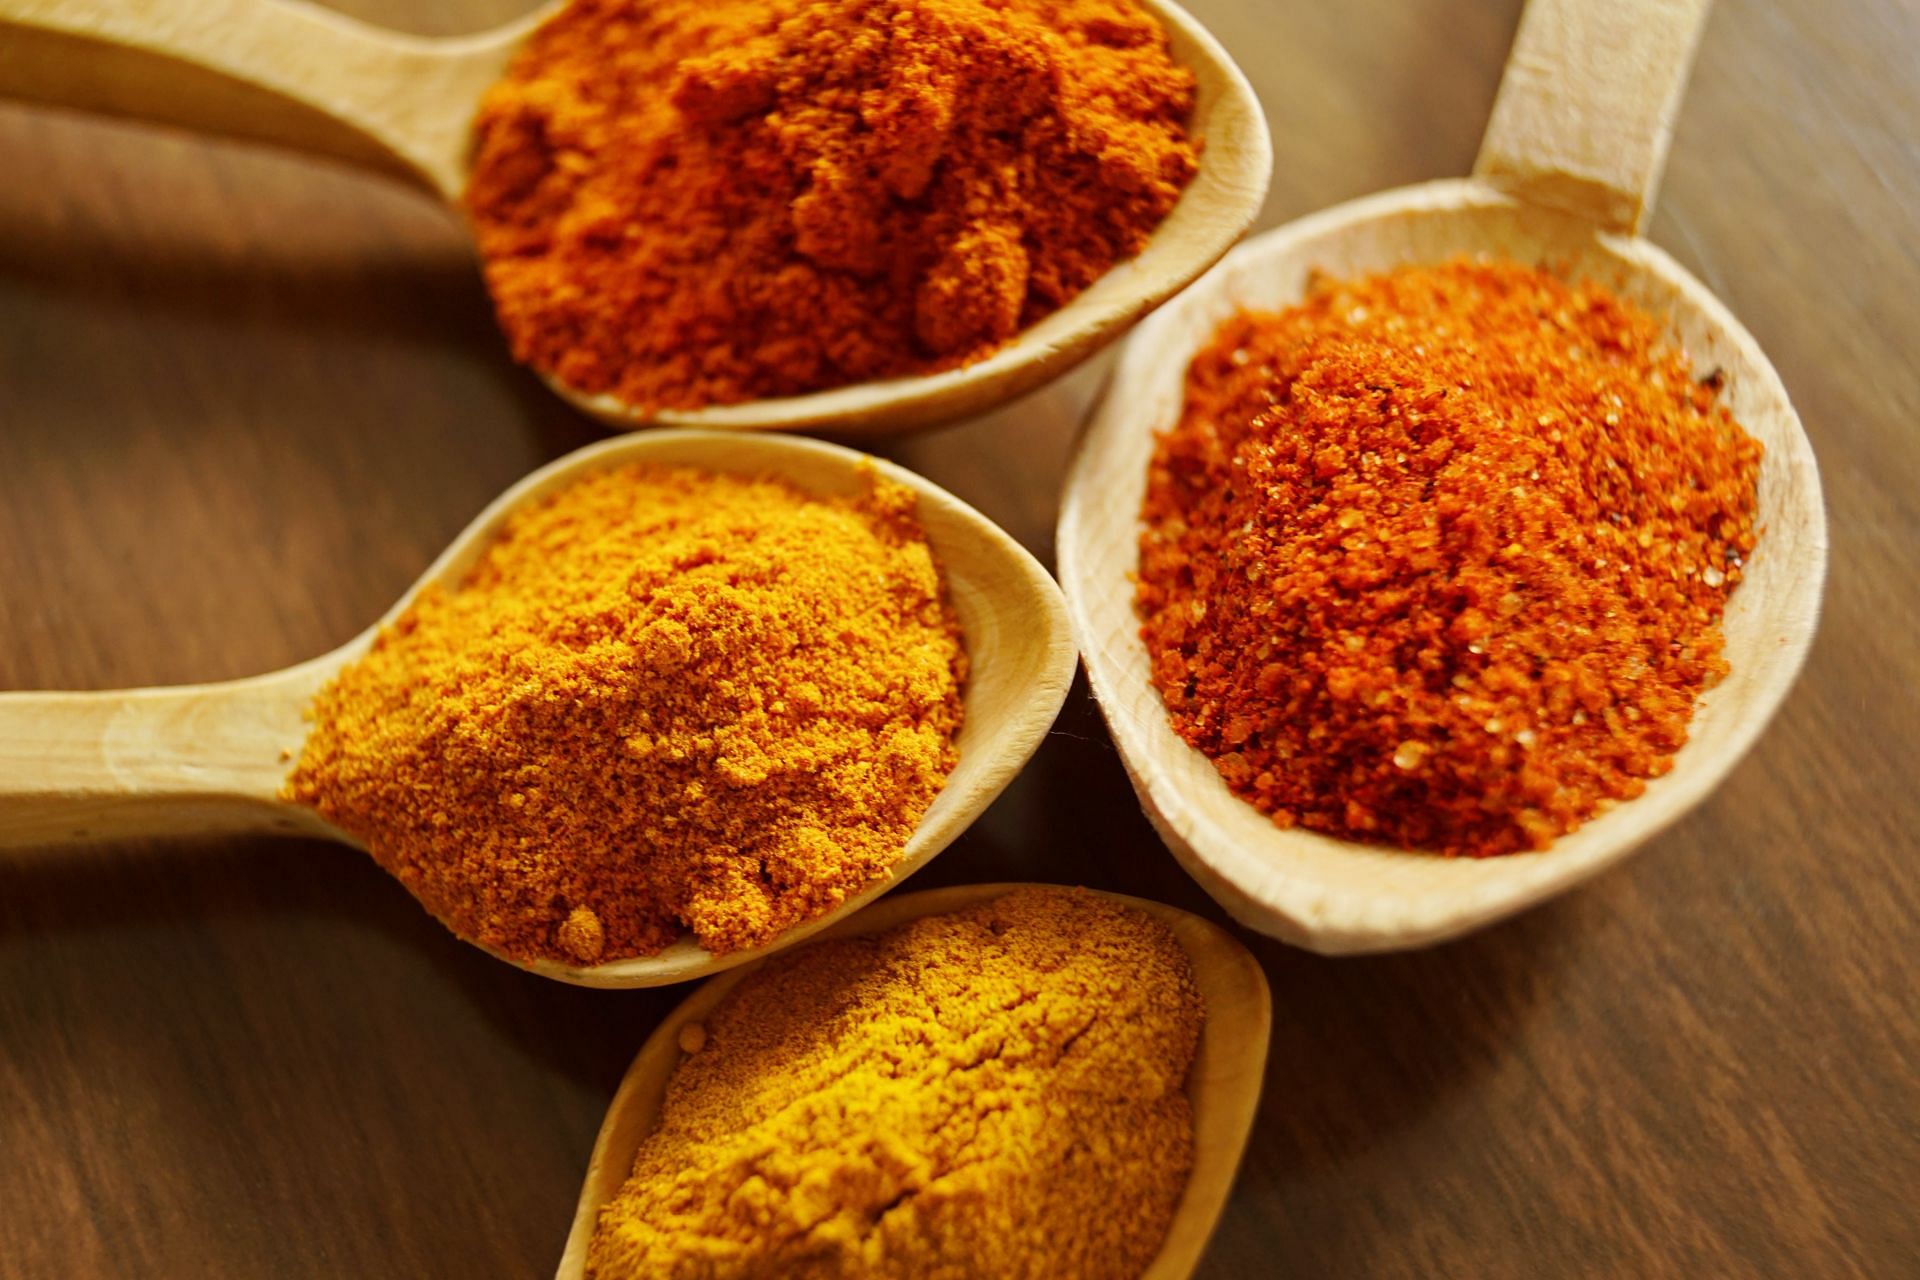 Eating to help anxiety by consuming moderate levels of turmeric (image sourced via Pexels / Photo by marta brancos)